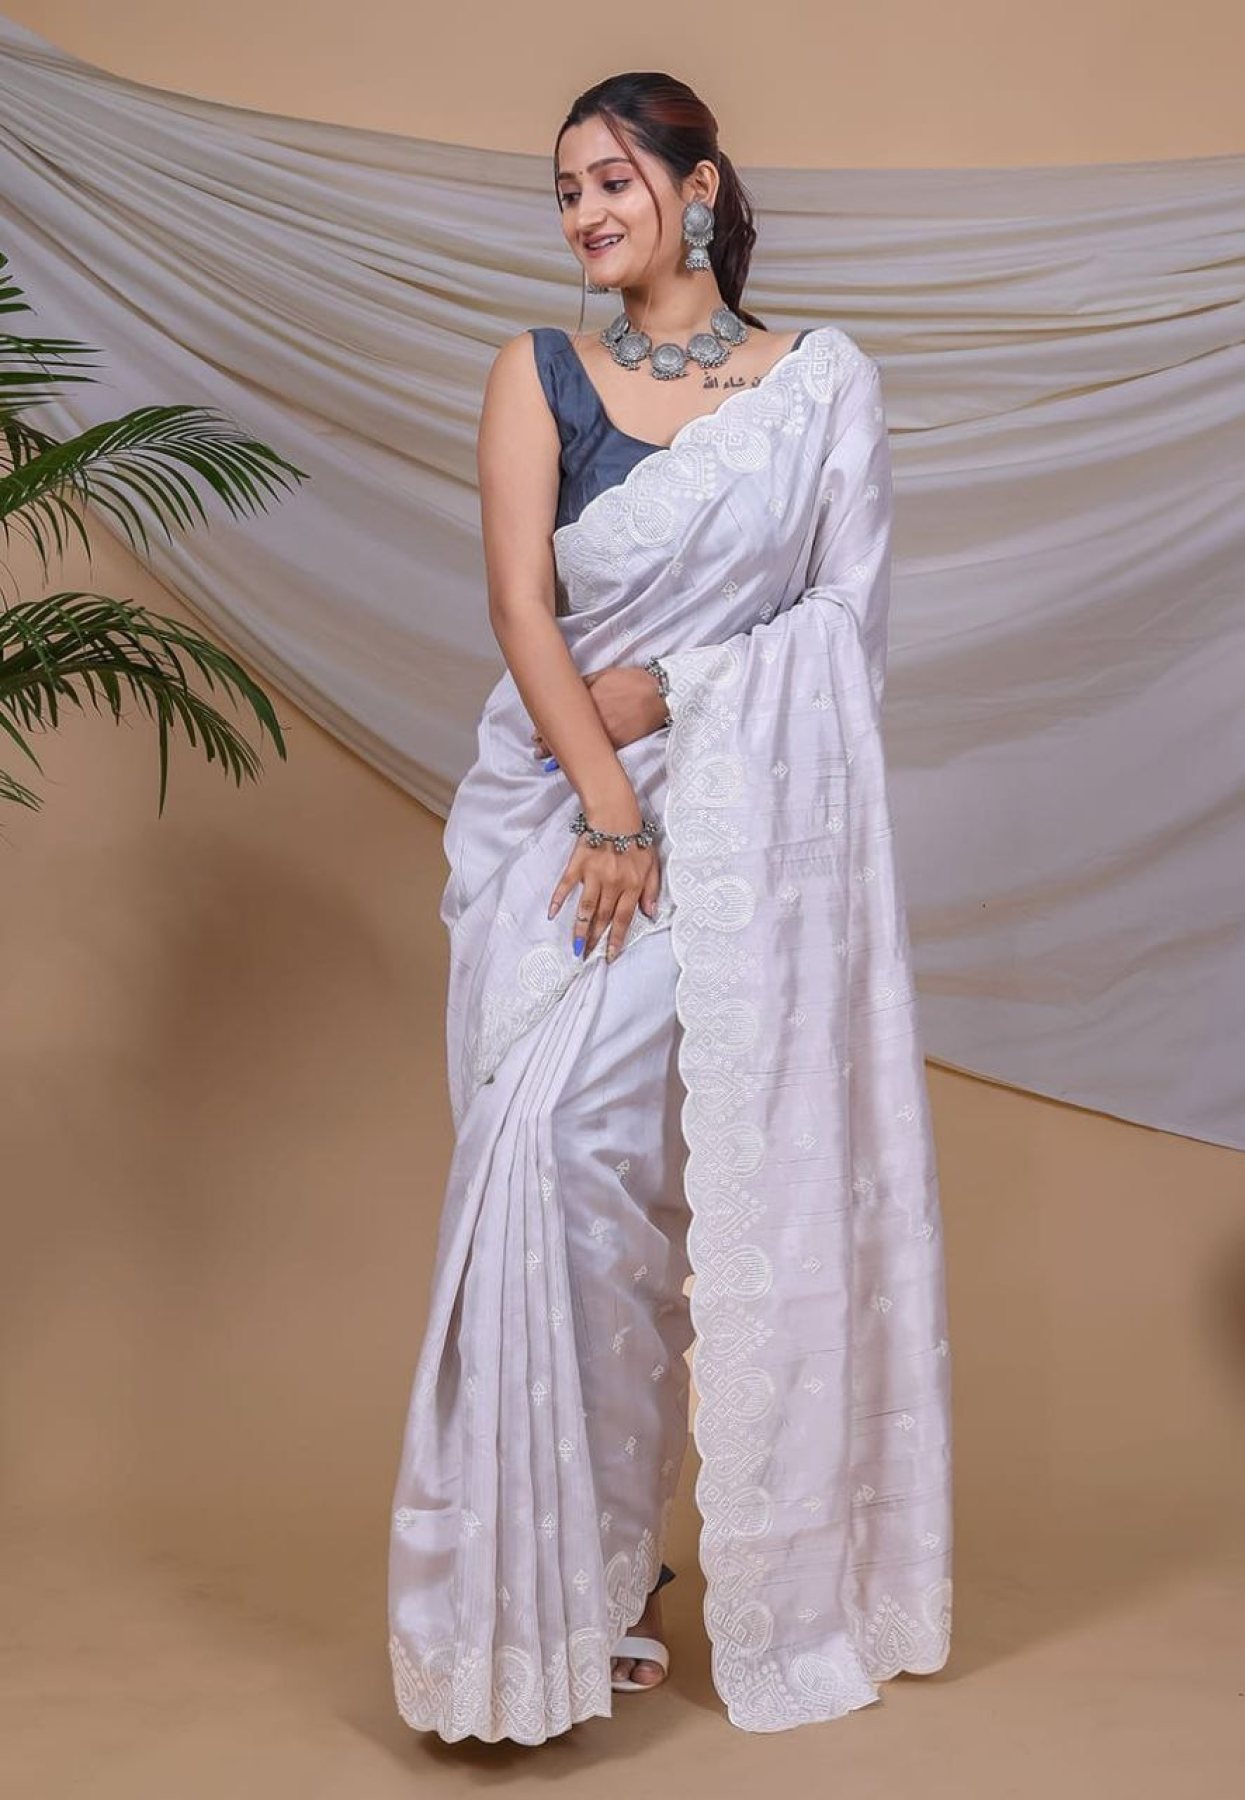 SHAKUNT WEAVES LALITHA SILK SAREES AT BEST PRICE